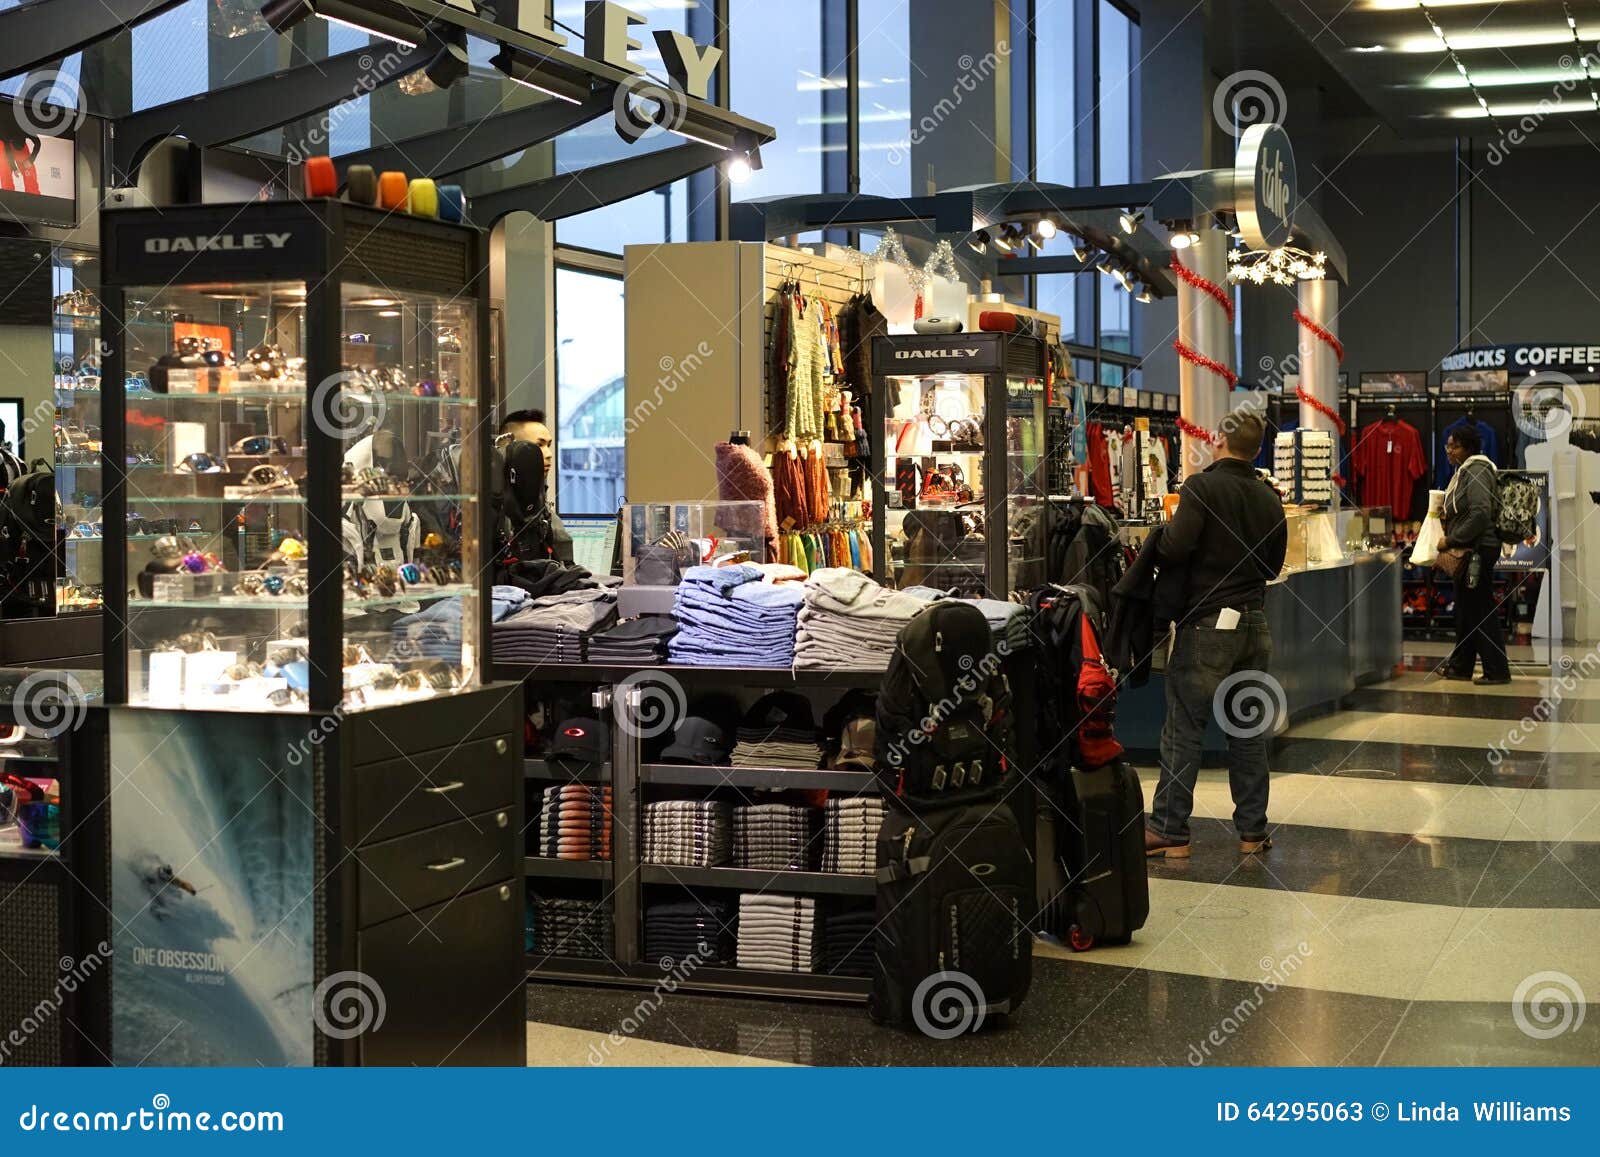 Oakley Store, 10000 West O'Hare Ave, Terminal 1-B Chicago, IL